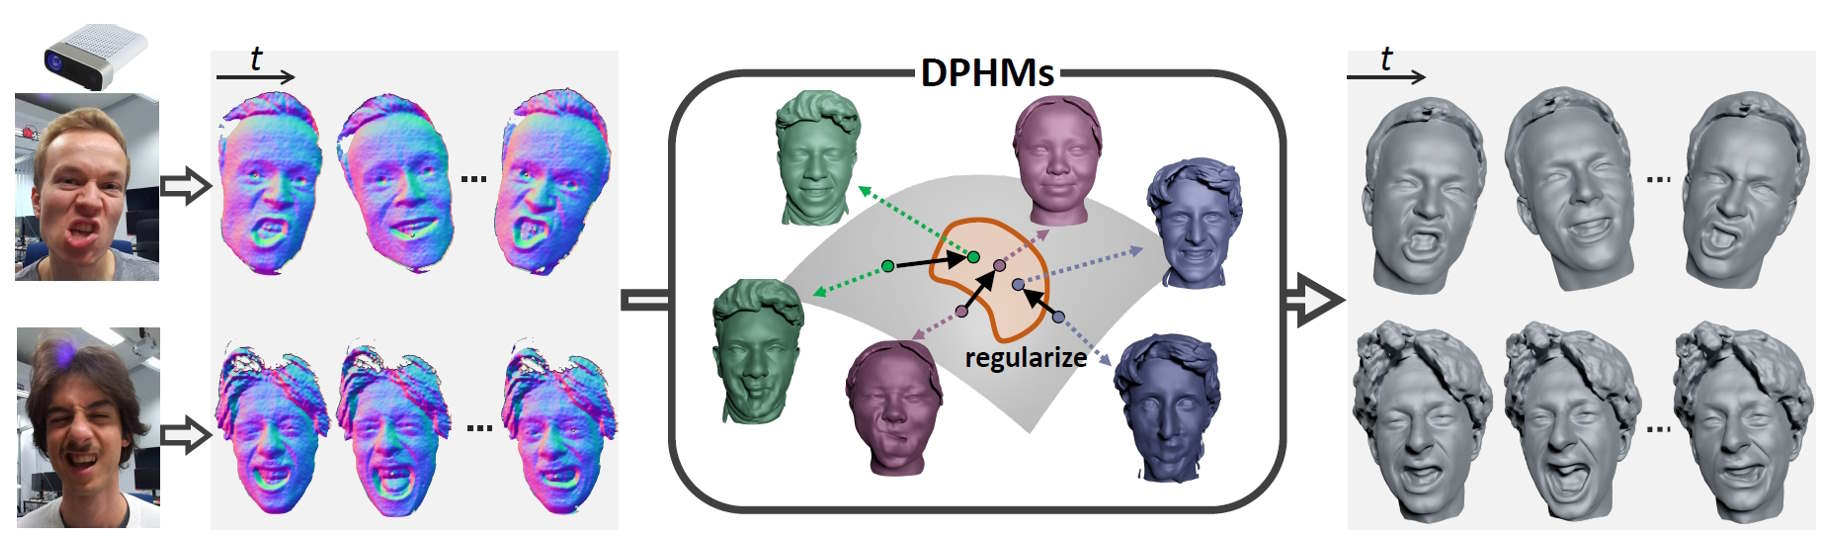 DPHMs - Diffusion Parametric Head Models for Depth-based Tracking